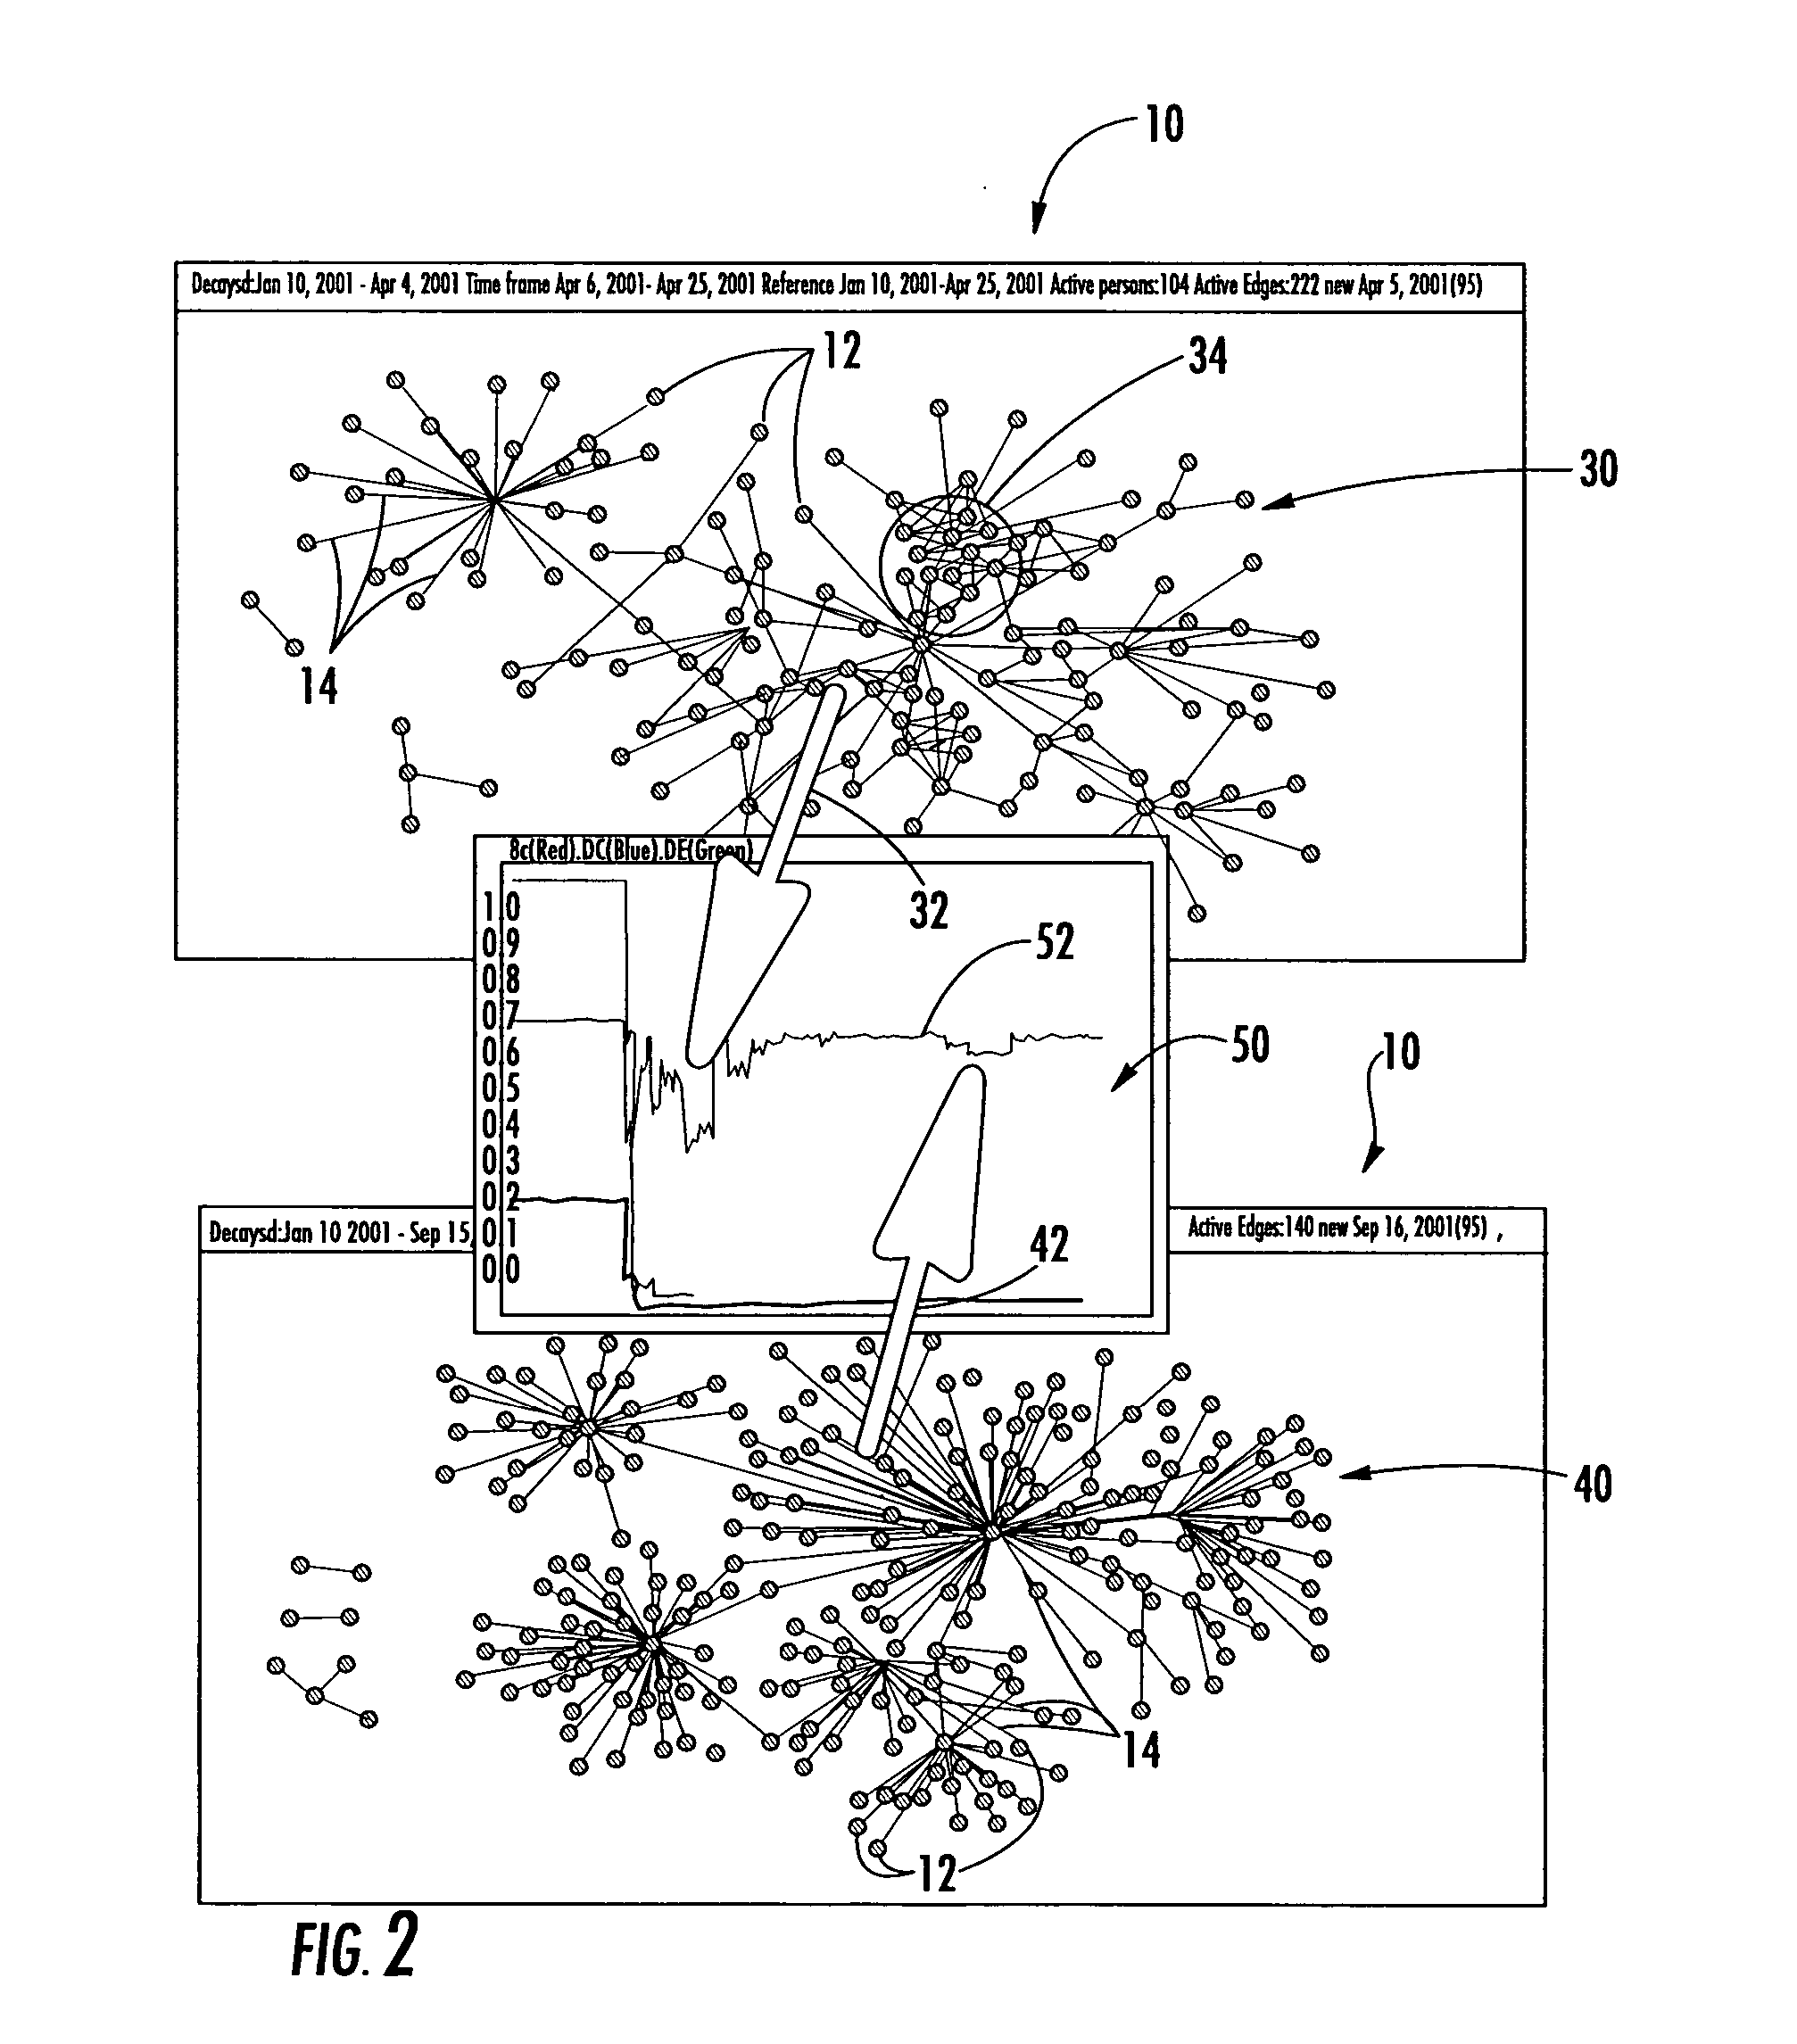 Temporal visualization algorithm for recognizing and optimizing organizational structure